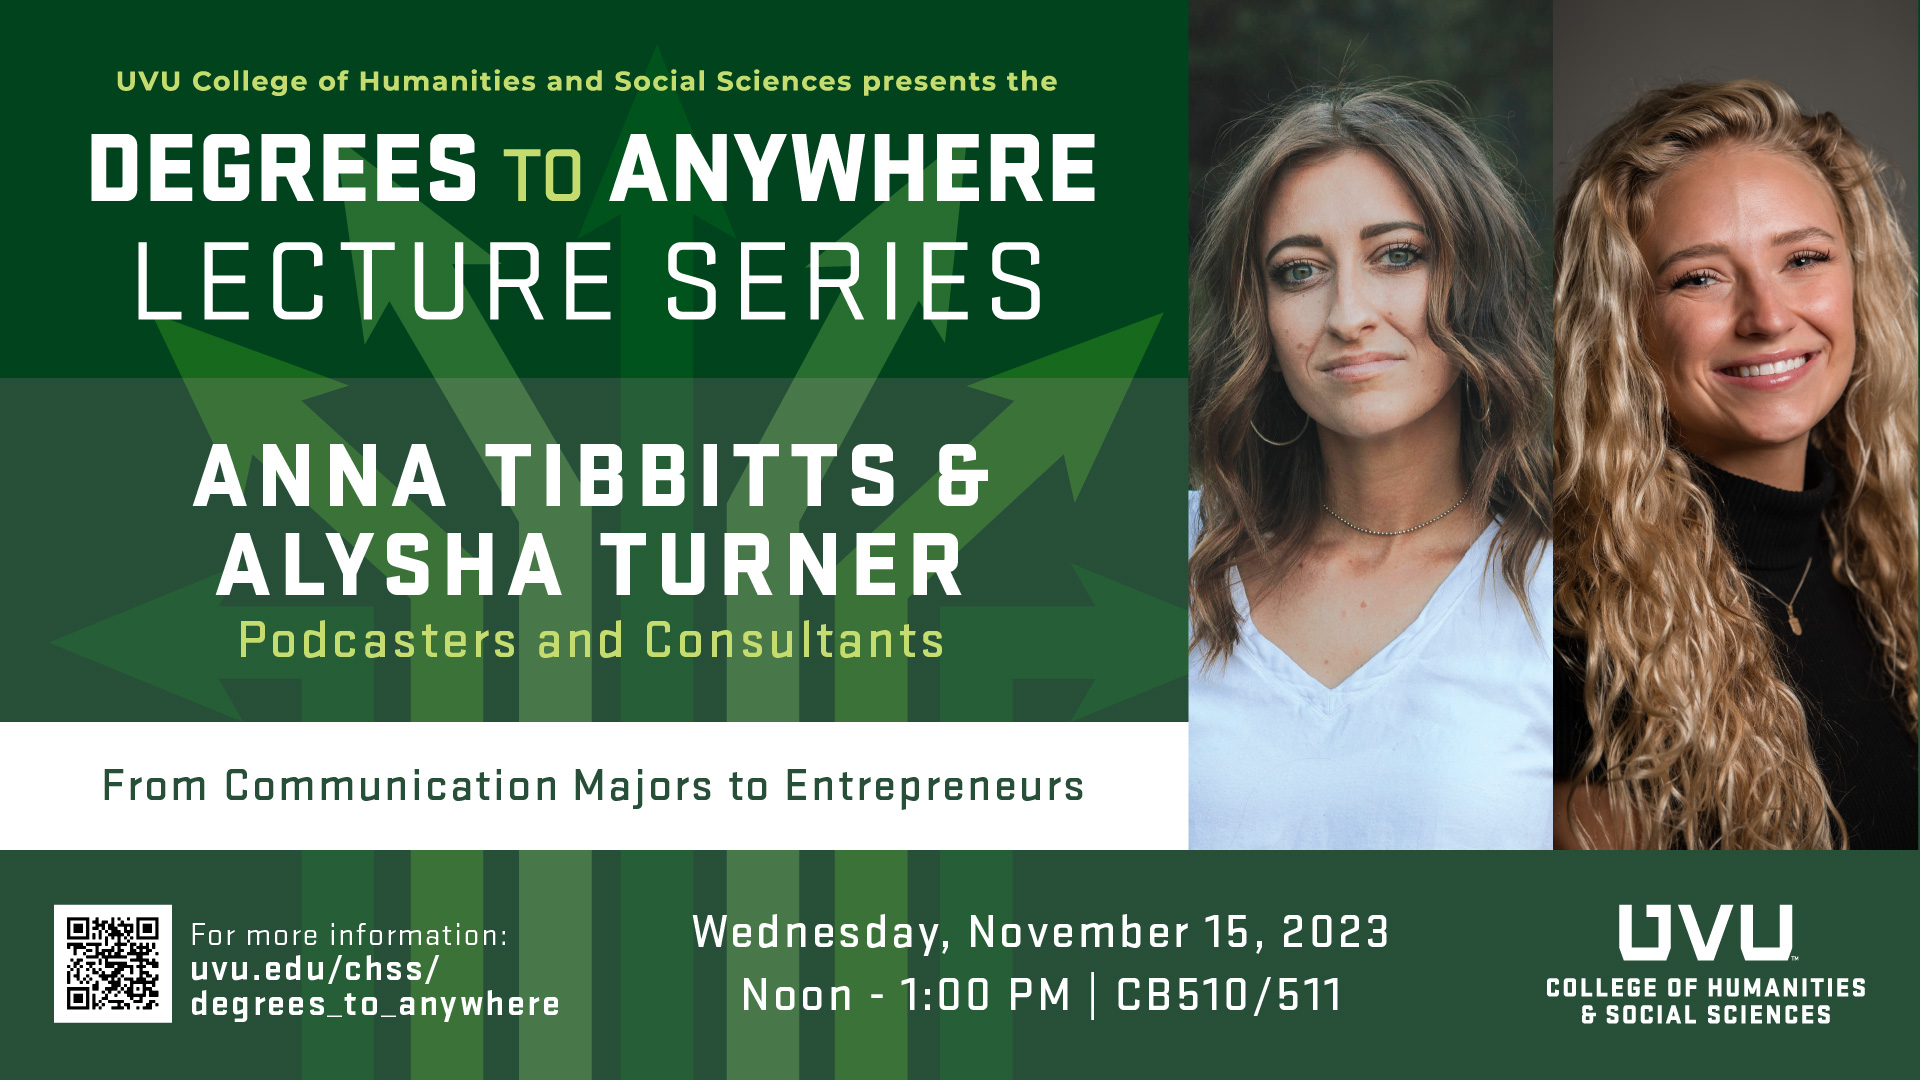 Degrees to Anywhere speakers Anna Tibbitts and Alysha Turner, presenting on November 15, 2023 at 12pm-1pm in CB510/511